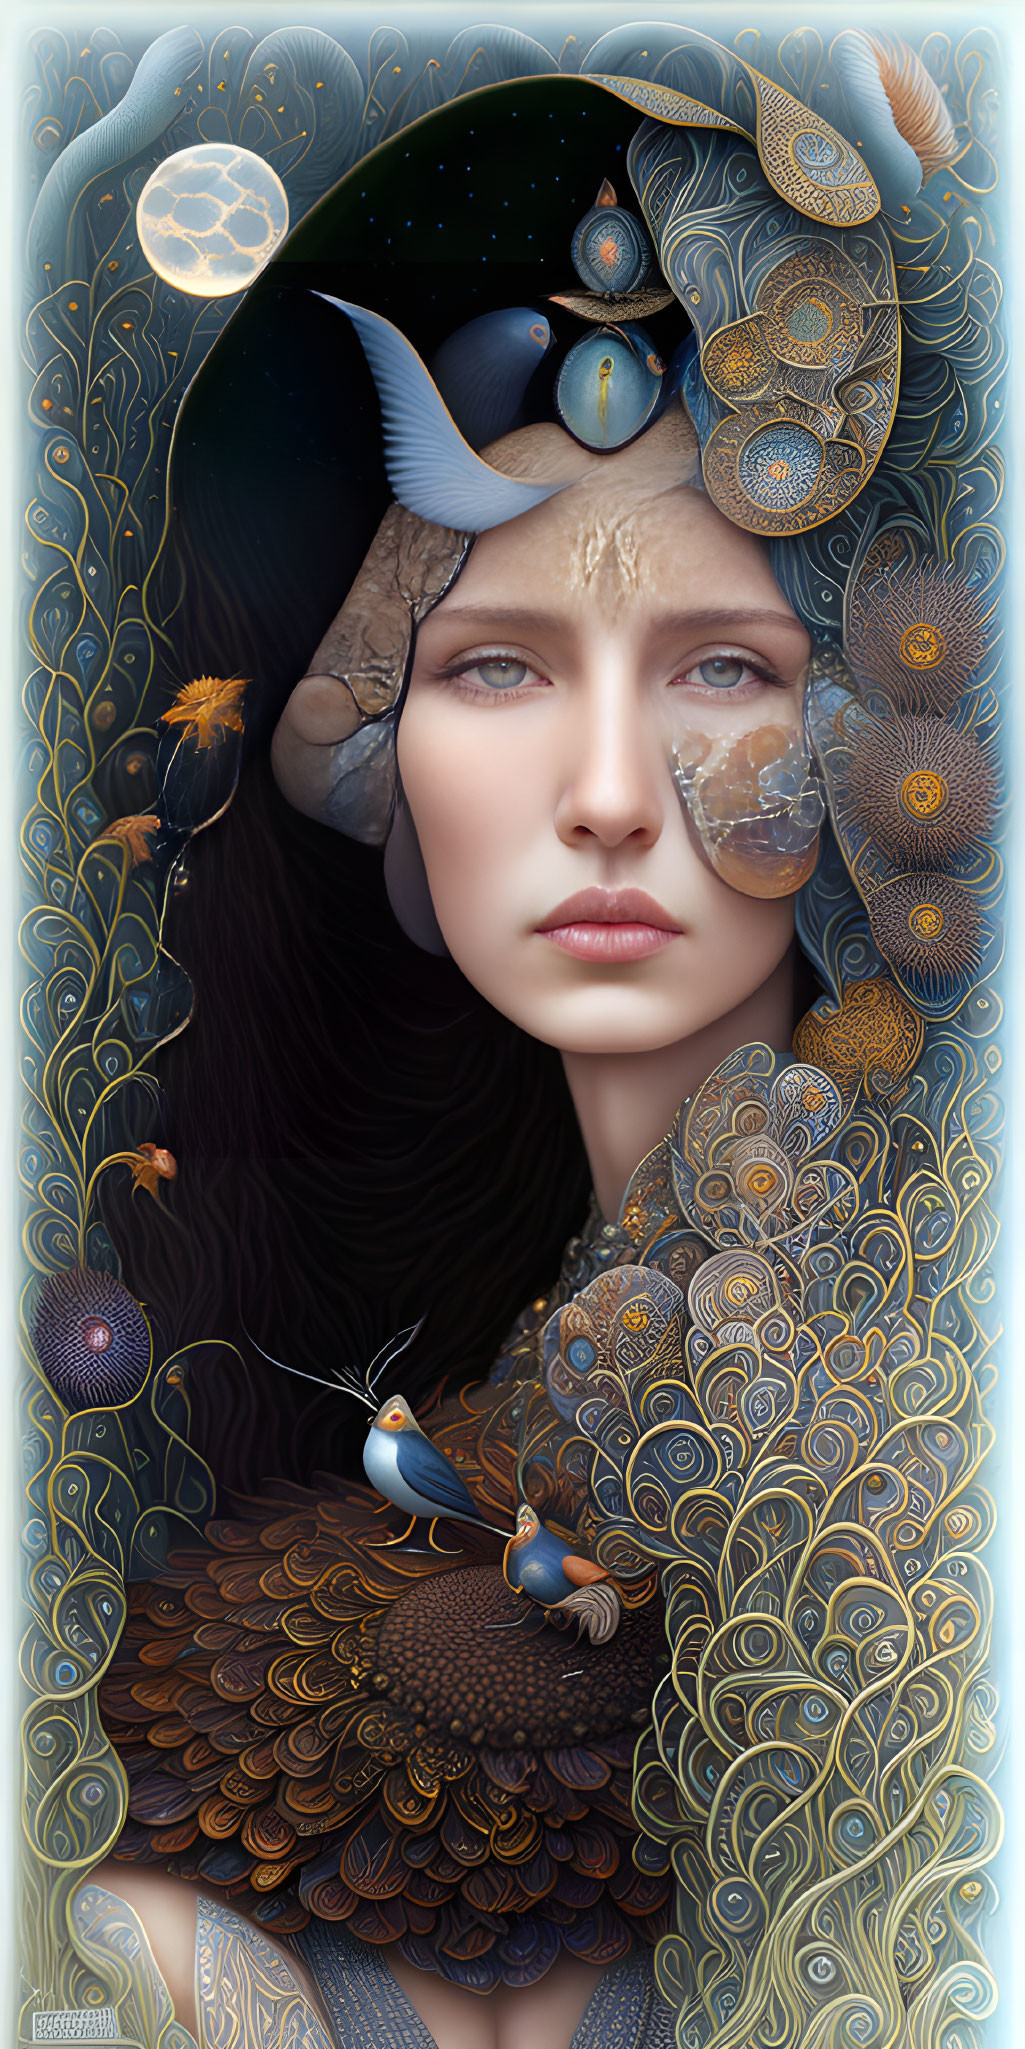 Dark-haired woman in surreal portrait with celestial patterns and mystical creatures.